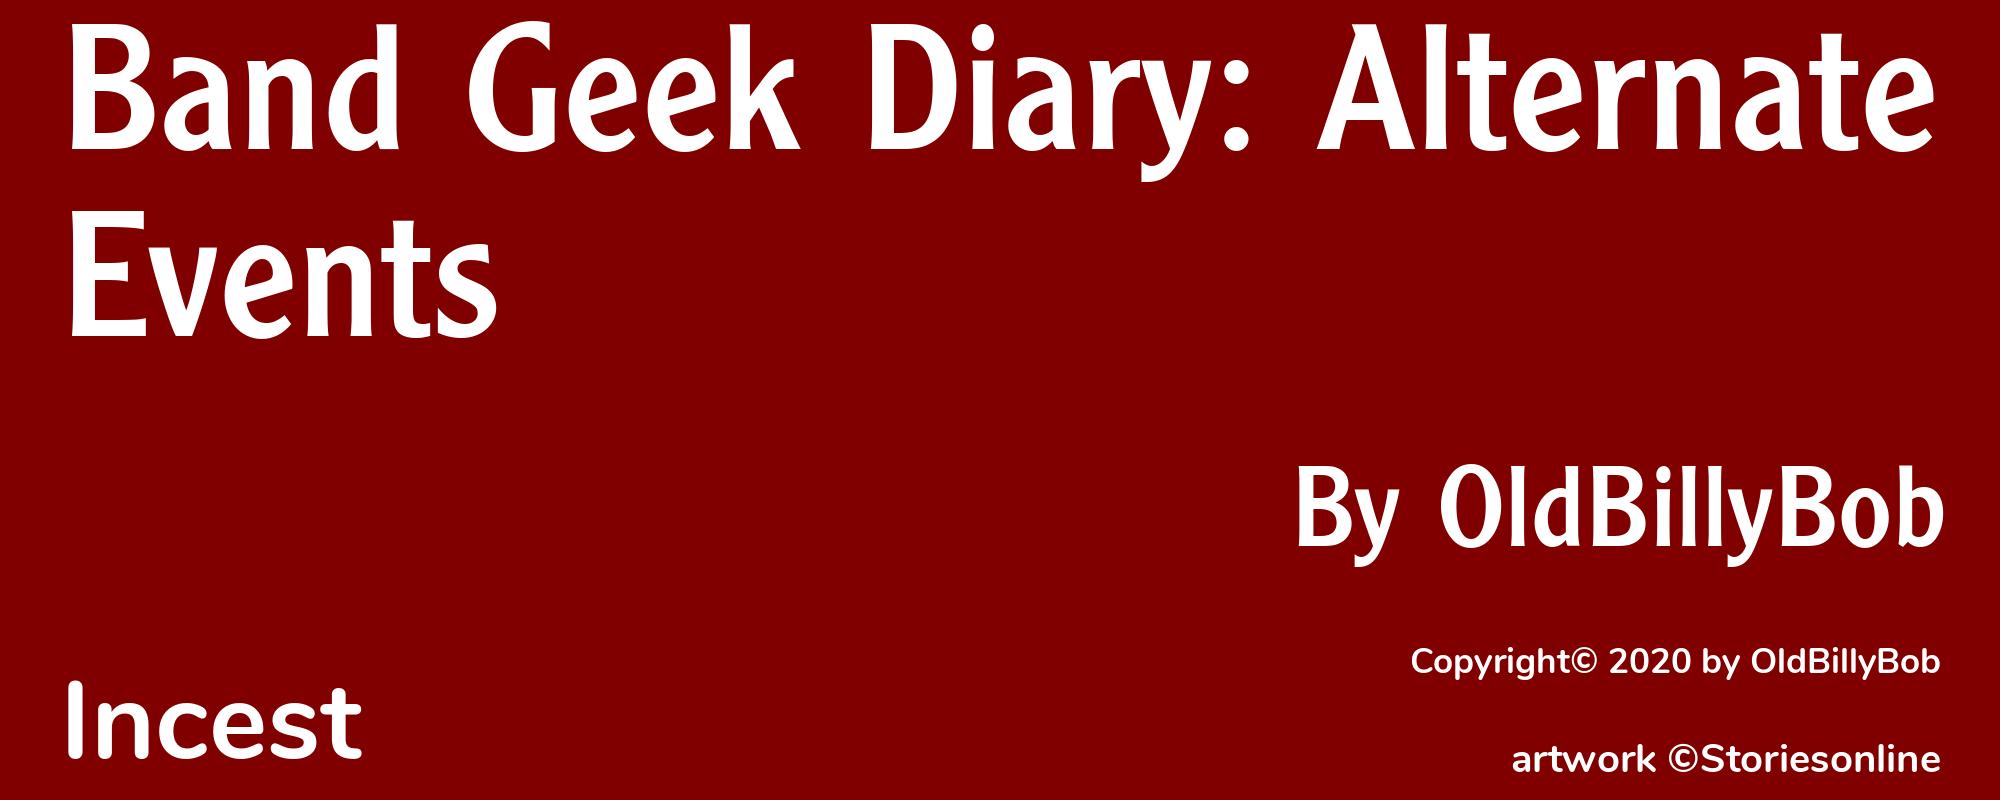 Band Geek Diary: Alternate Events - Cover